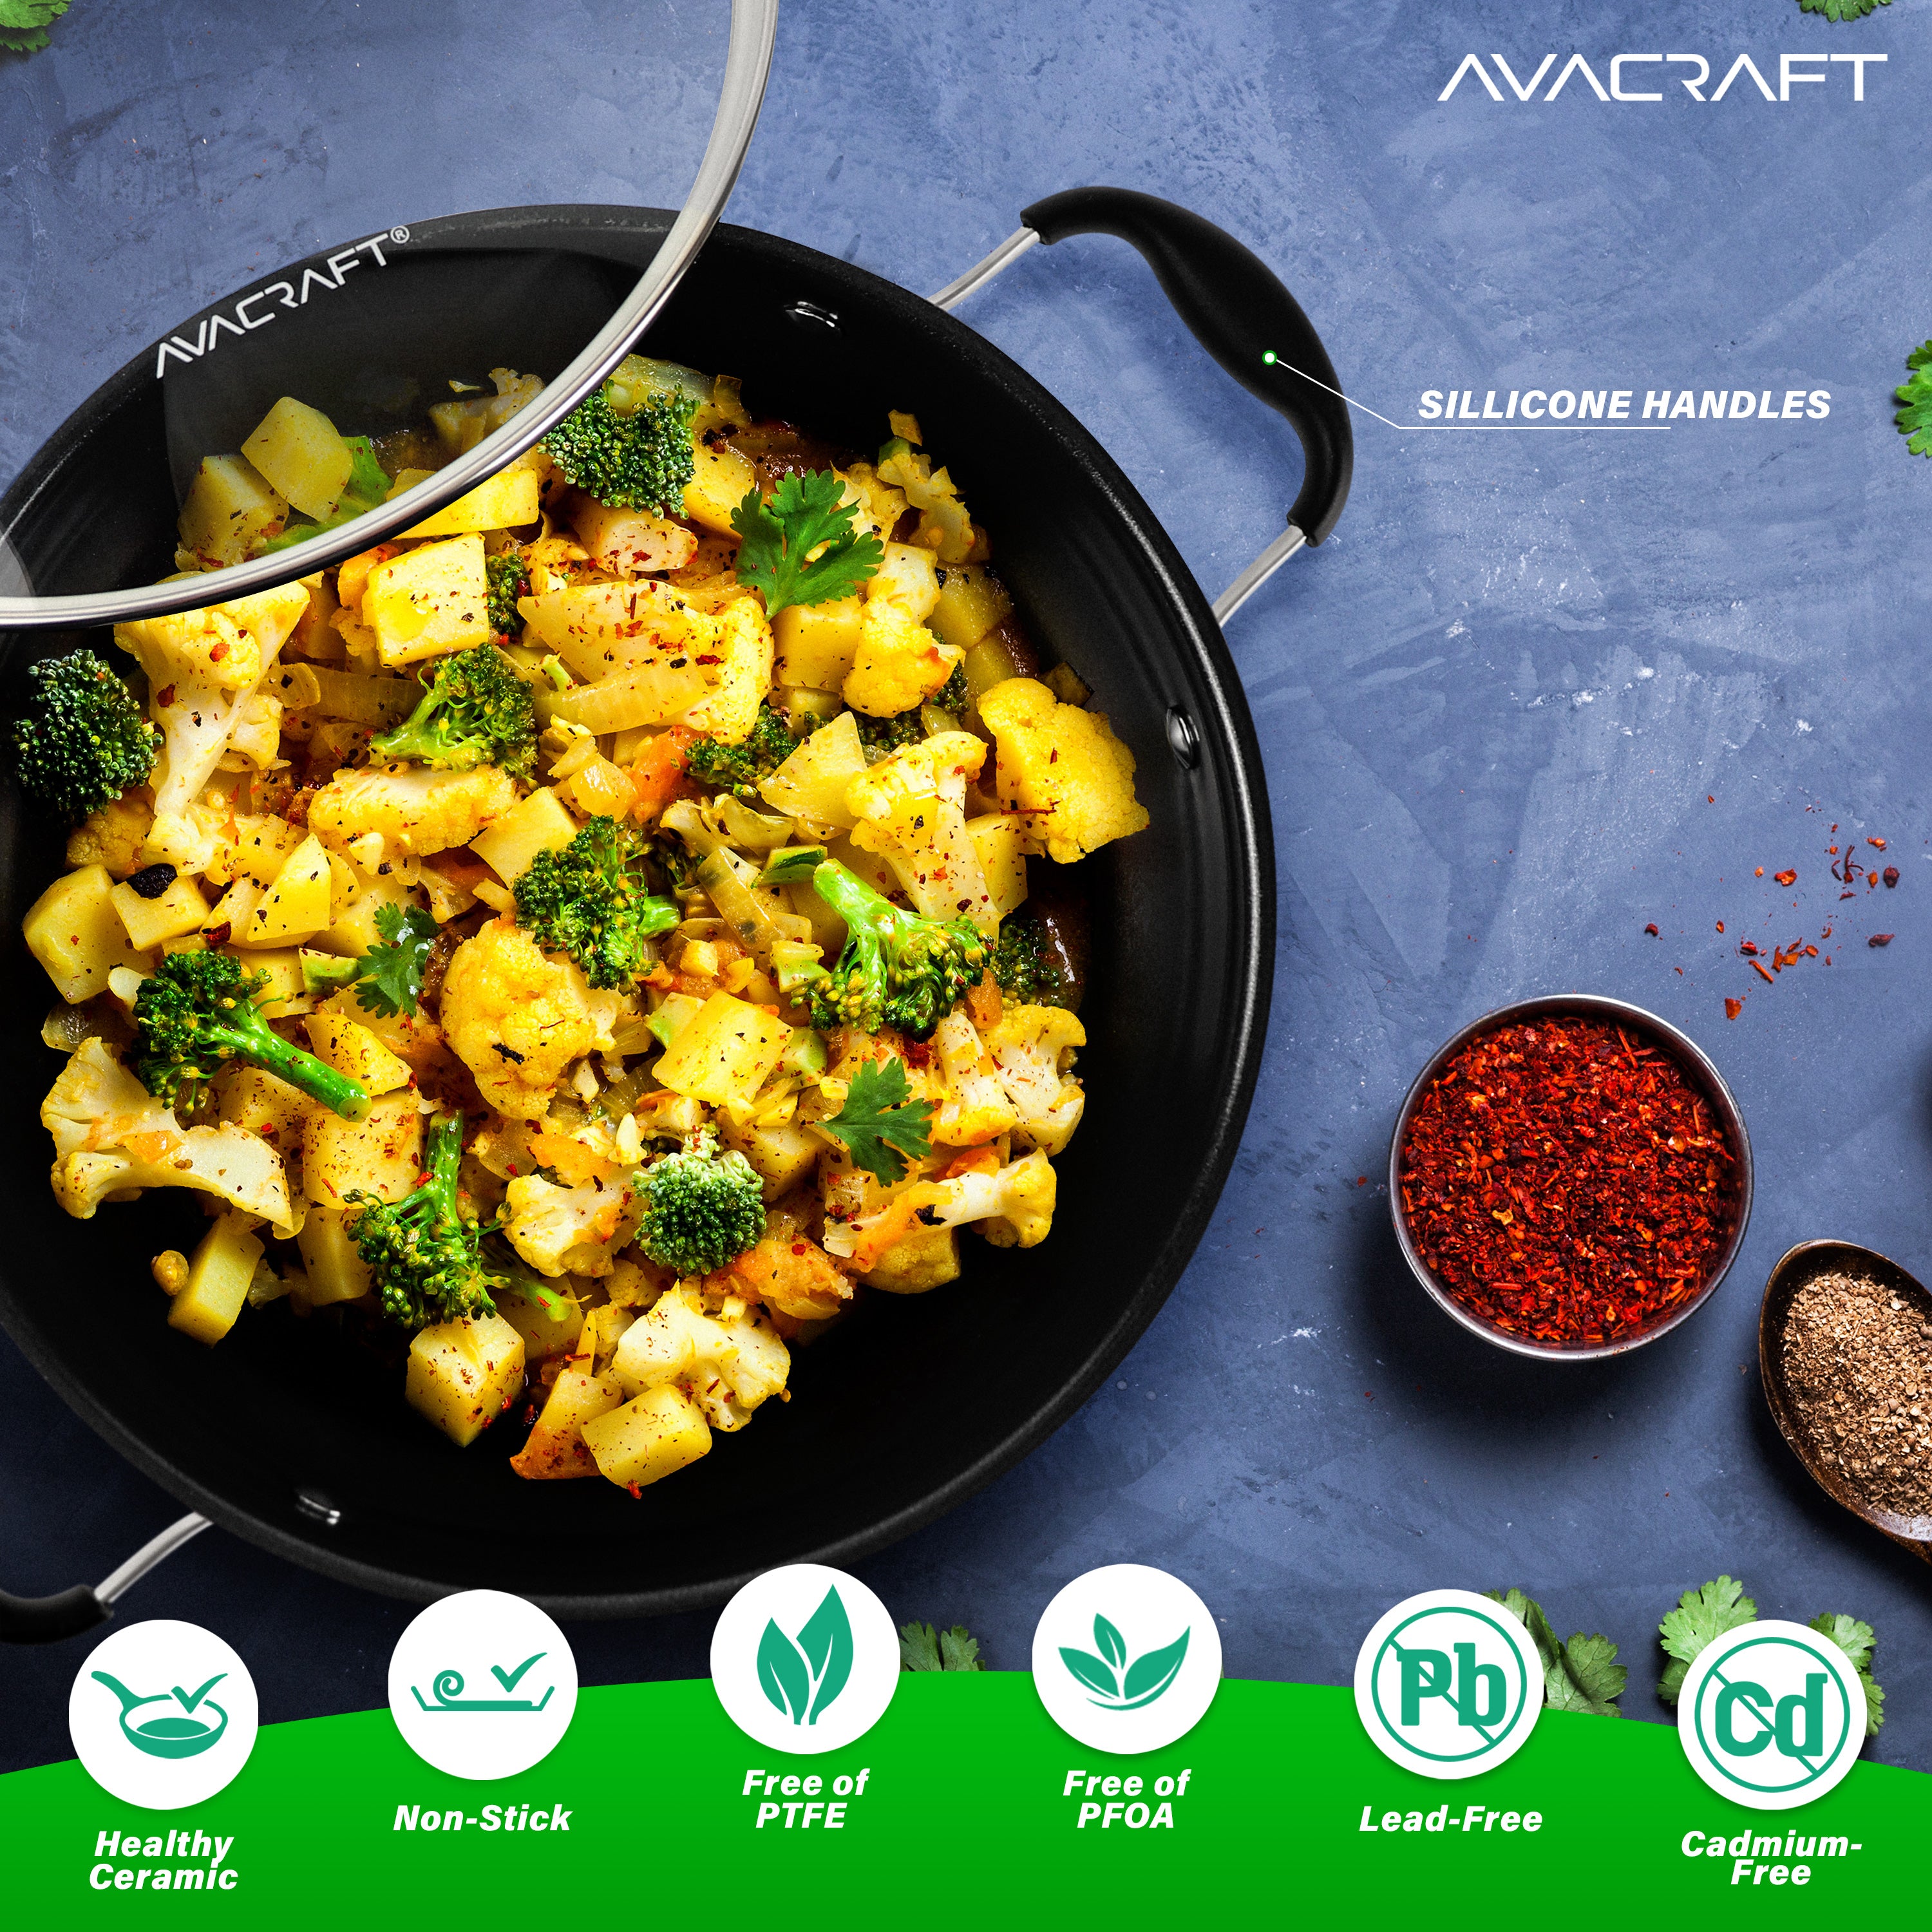 AVACRAFT 9 inch Nonstick Everyday Pan, Ceramic Multiclad Stainless Steel,  100% PTFE, PFOA Free, Ceramic Chef's Pan with Glass Lid, Kadai in Pots and